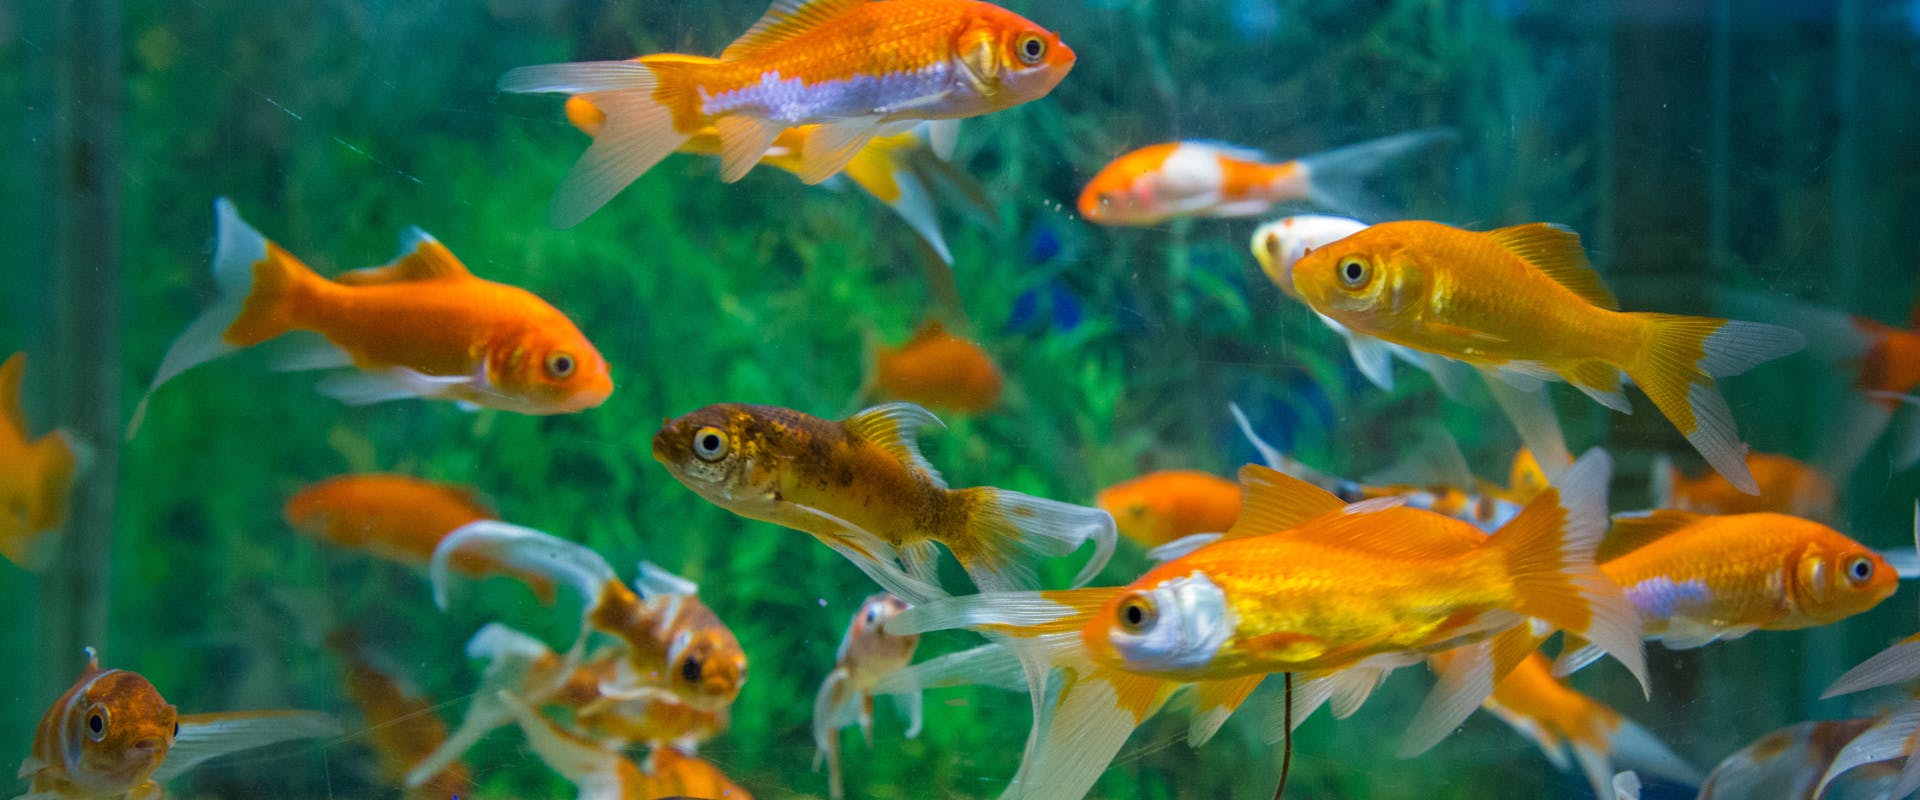 a group of brightly colored goldfish guppies